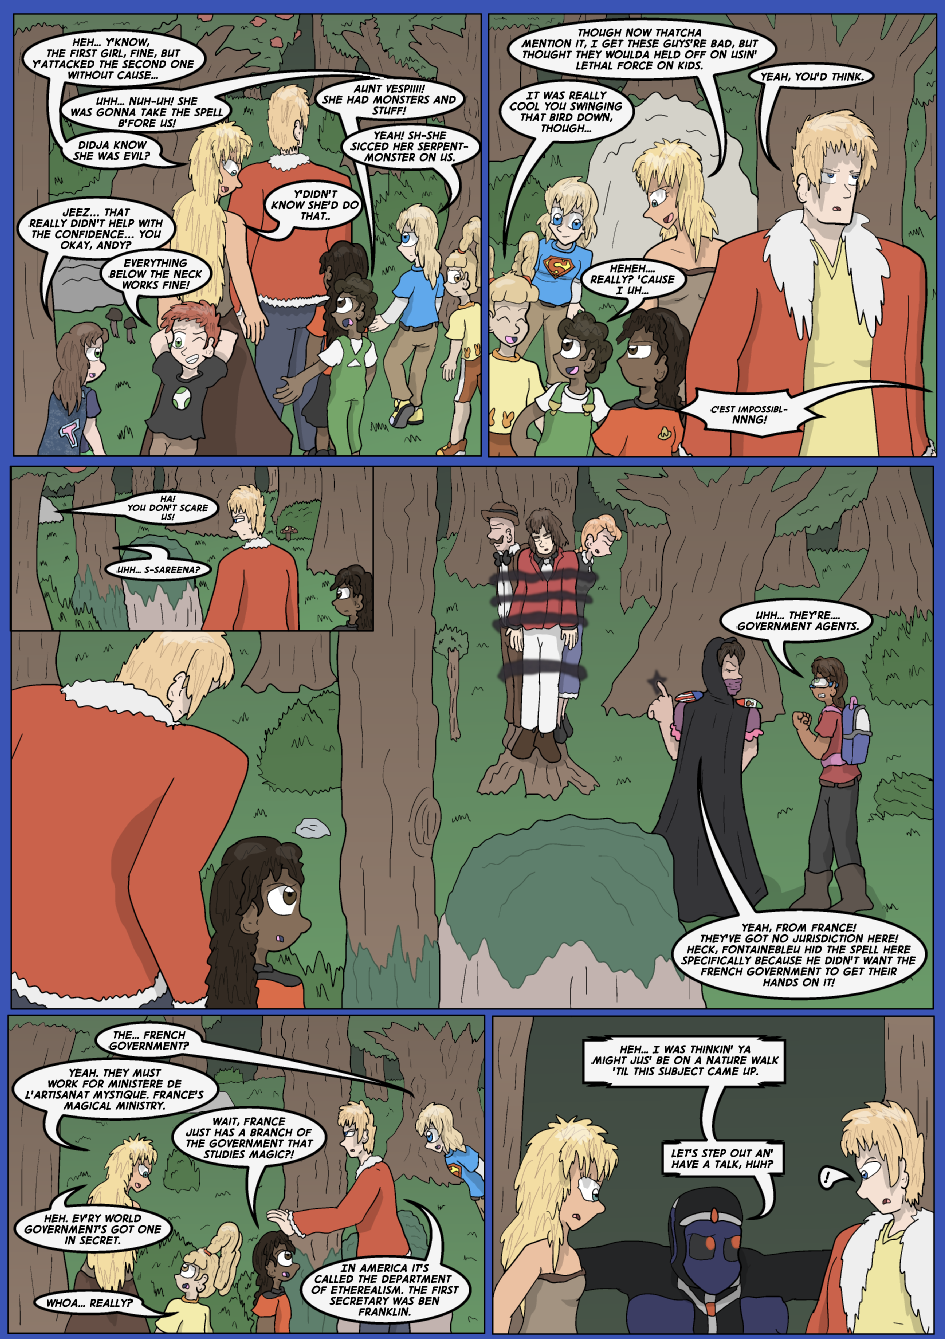 The Lost Spell of Baron Fontainebleu, Page 10